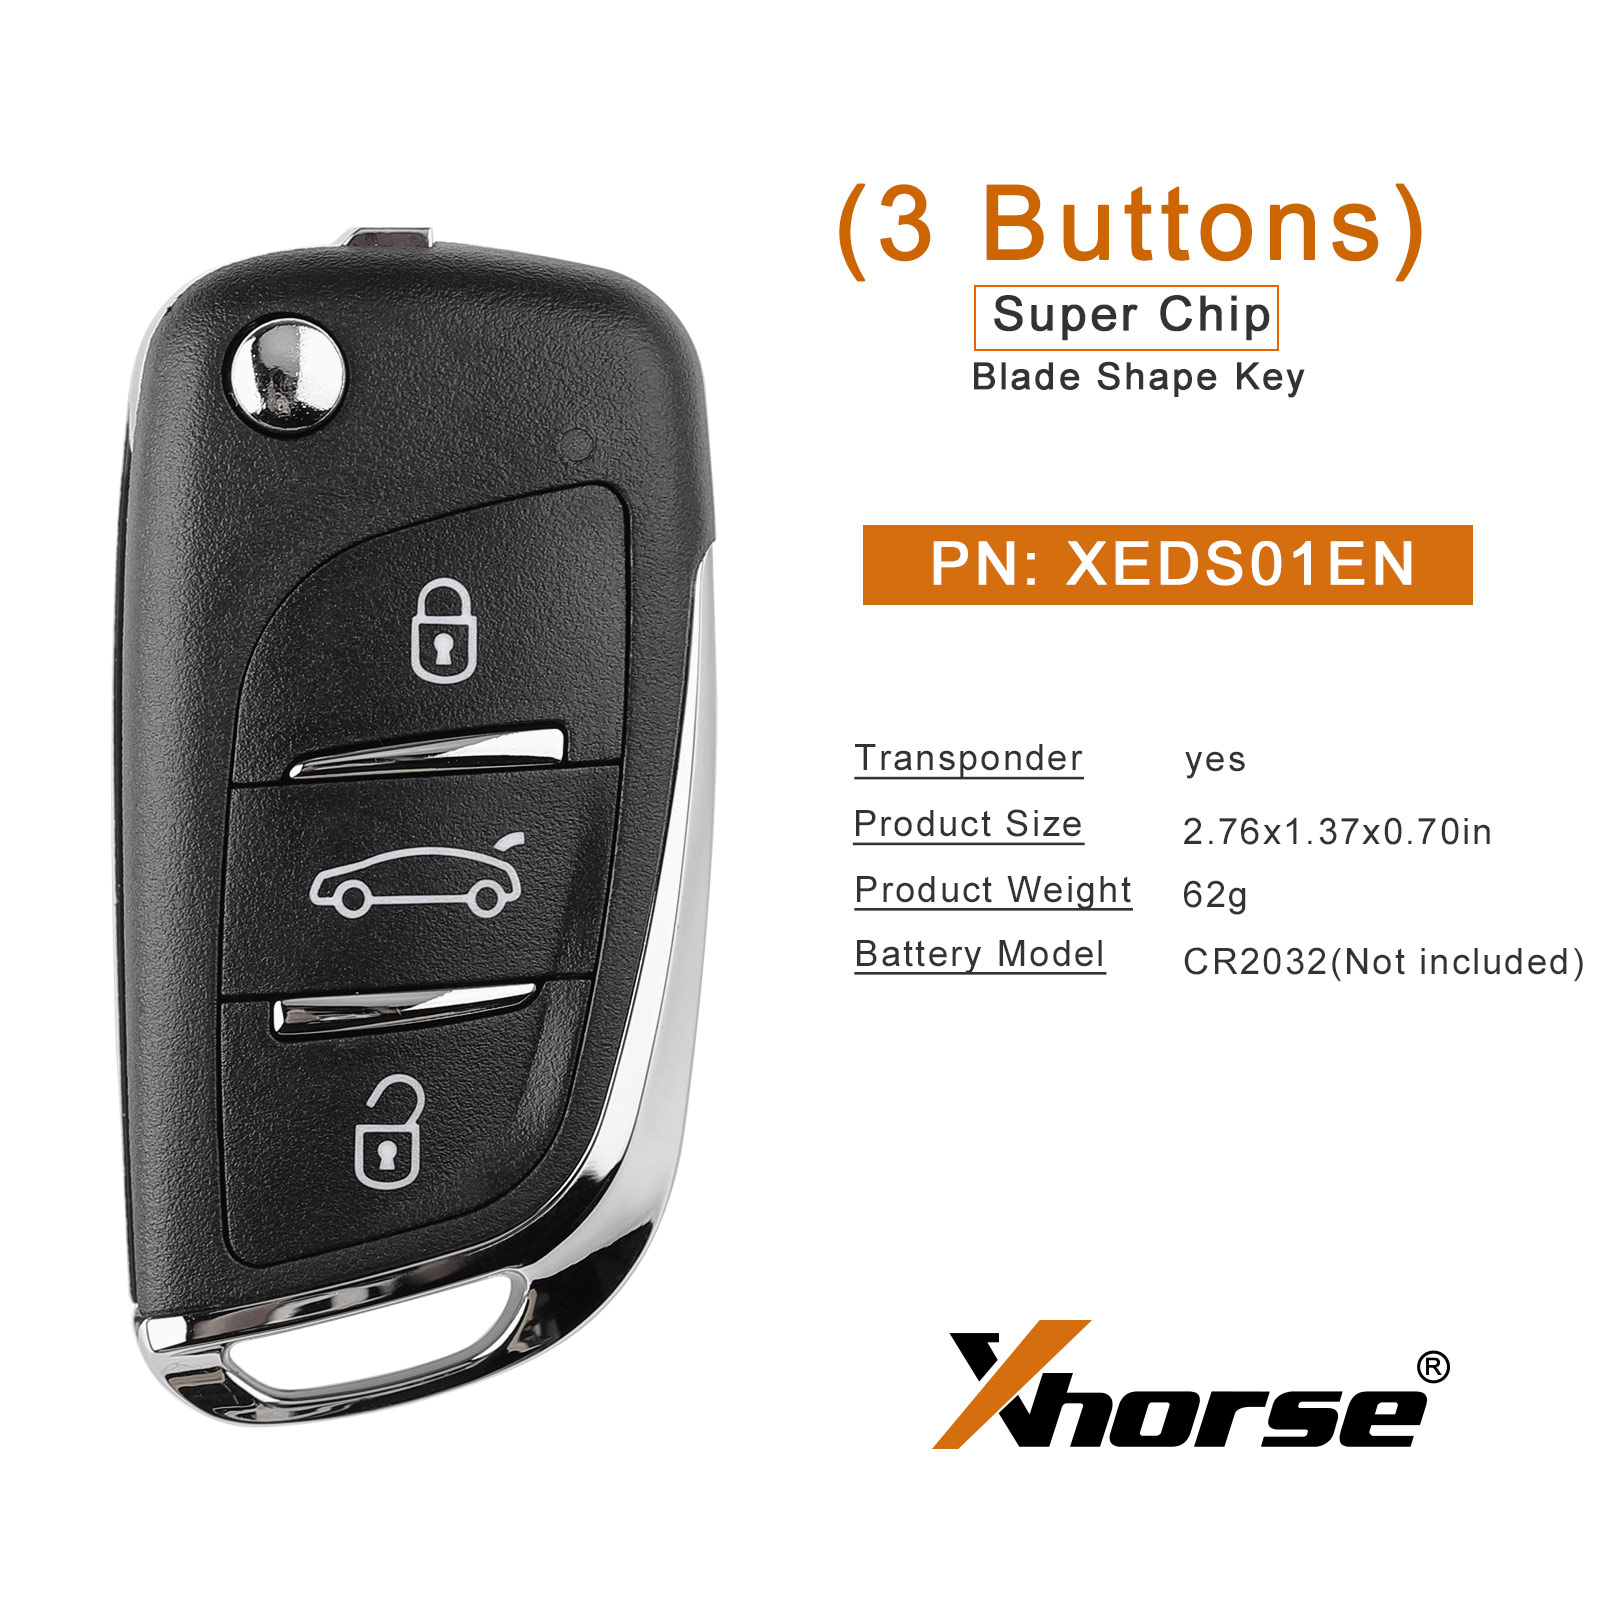 Battery XHORSE DS SUPER REMOTE, Number Of Buttons: 3 at Rs 750/piece in  Delhi